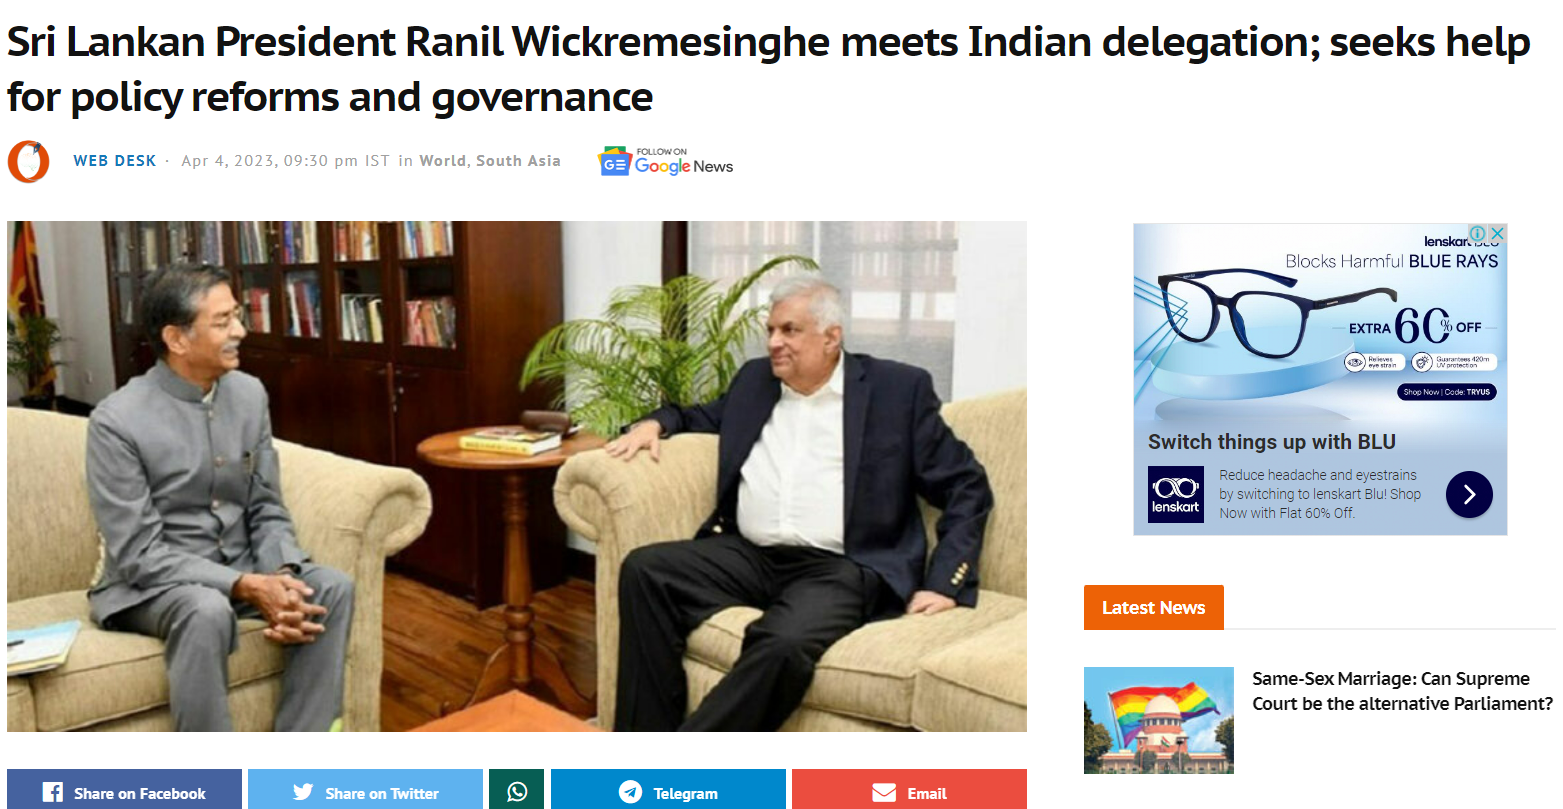 Sri Lankan President Ranil Wickremesinghe meets Indian delegation; seeks help for policy reforms and governance